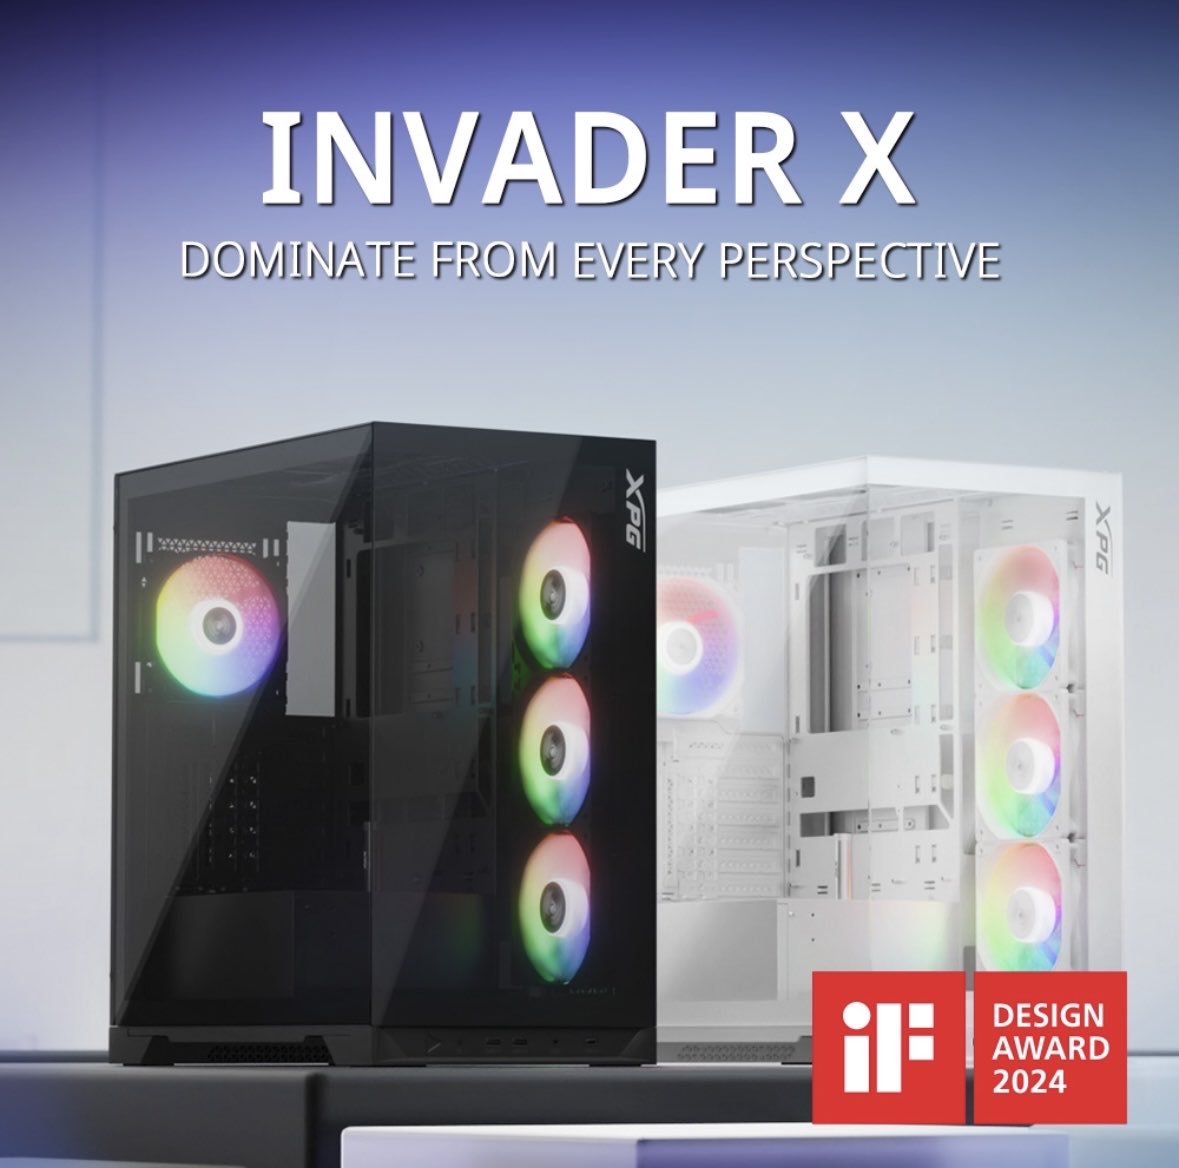 ✨Winning Design, Winning Responsibility✨ We’re thrilled to announce that XPG’s INVADER X mid-tower chassis has been awarded the prestigious iF DESIGN Award! 💫 #DominateFromEveryPerspective